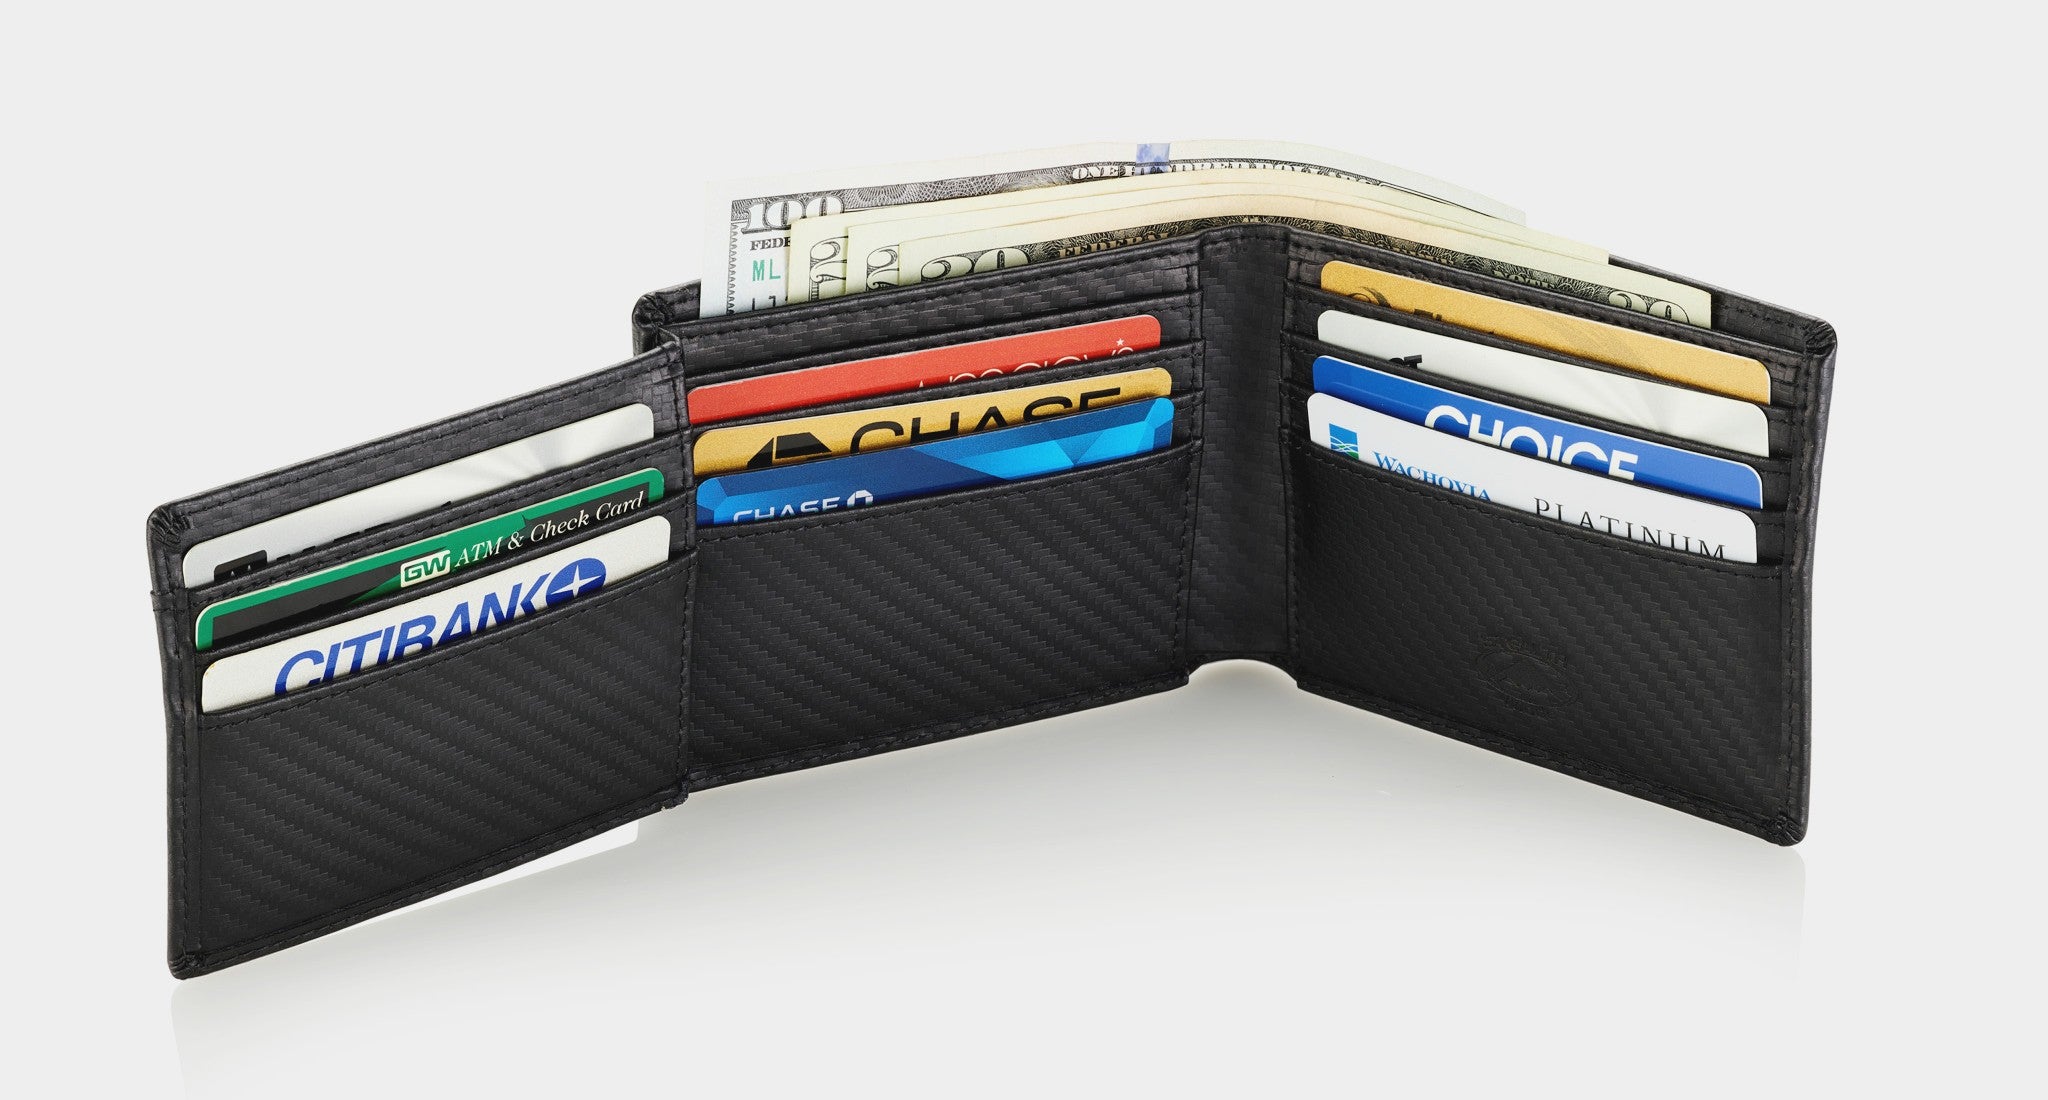 Carbon Fiber Travel Slim Wallet Total 12 Slots With 2 Folded Id